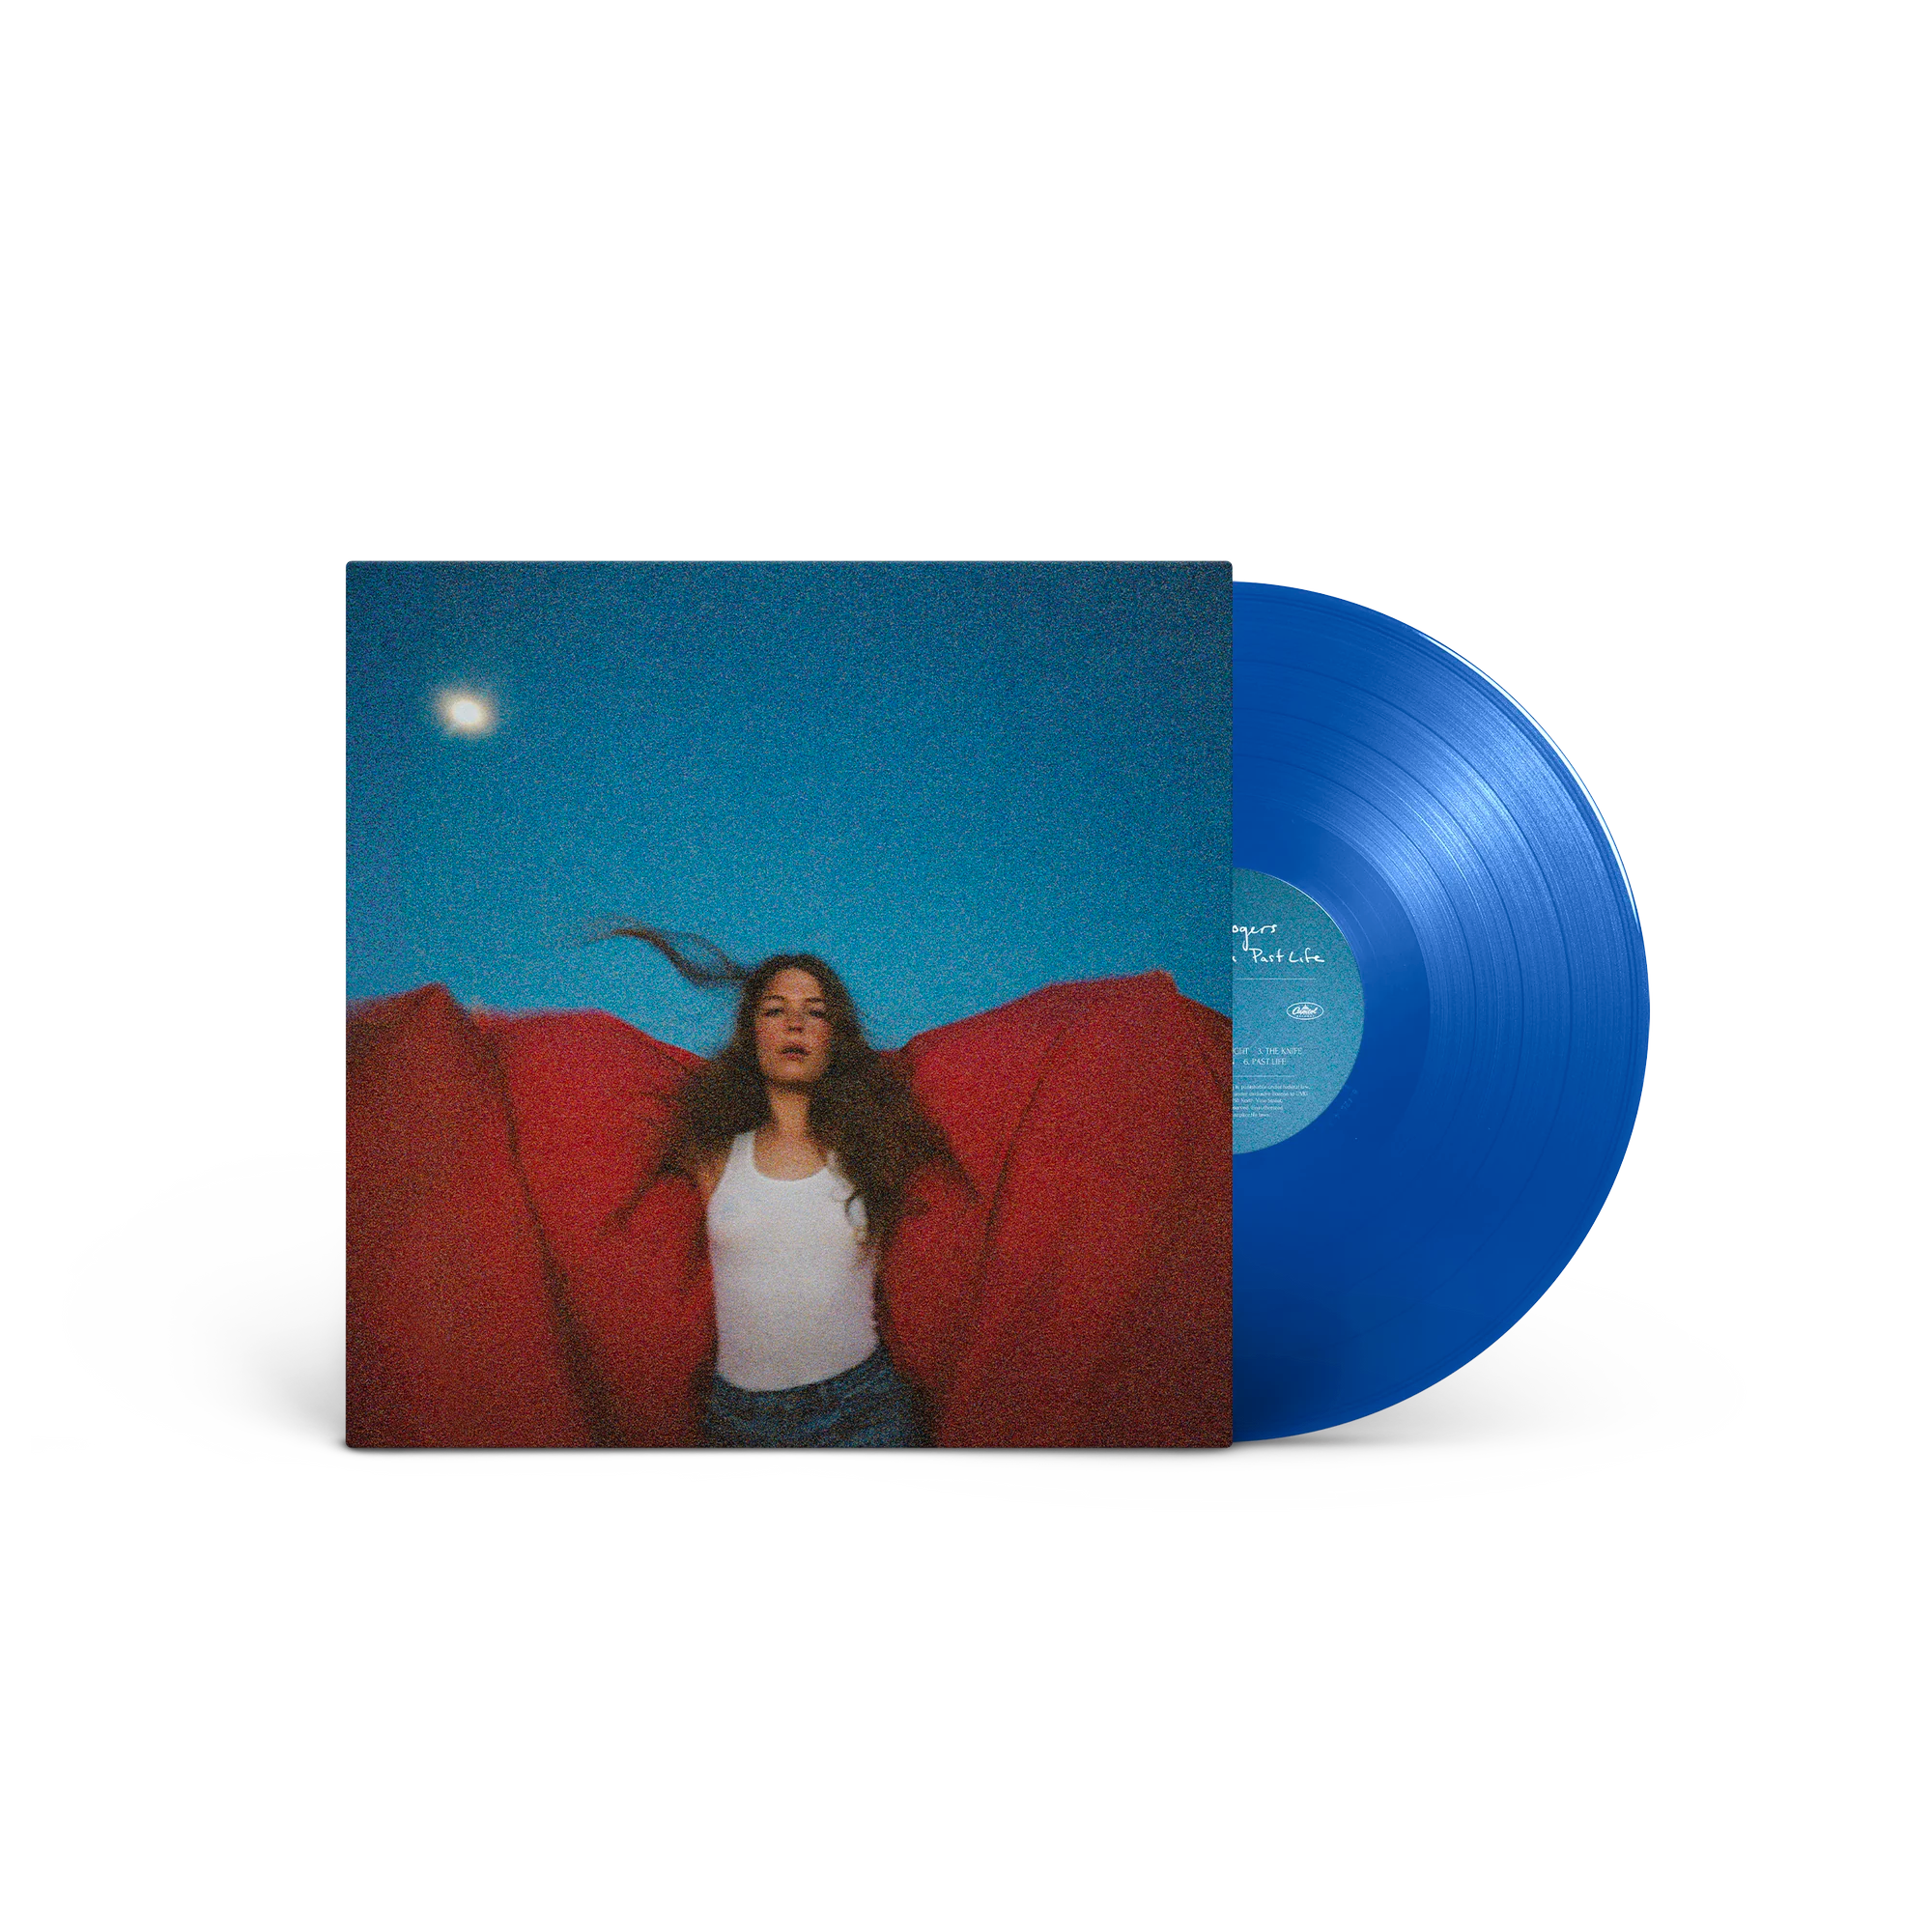 Maggie Rogers - Maggie Rogers: Heard It In A Past Life: 5 Year Anniversary Exclusive Deluxe LP (Limited Edition)